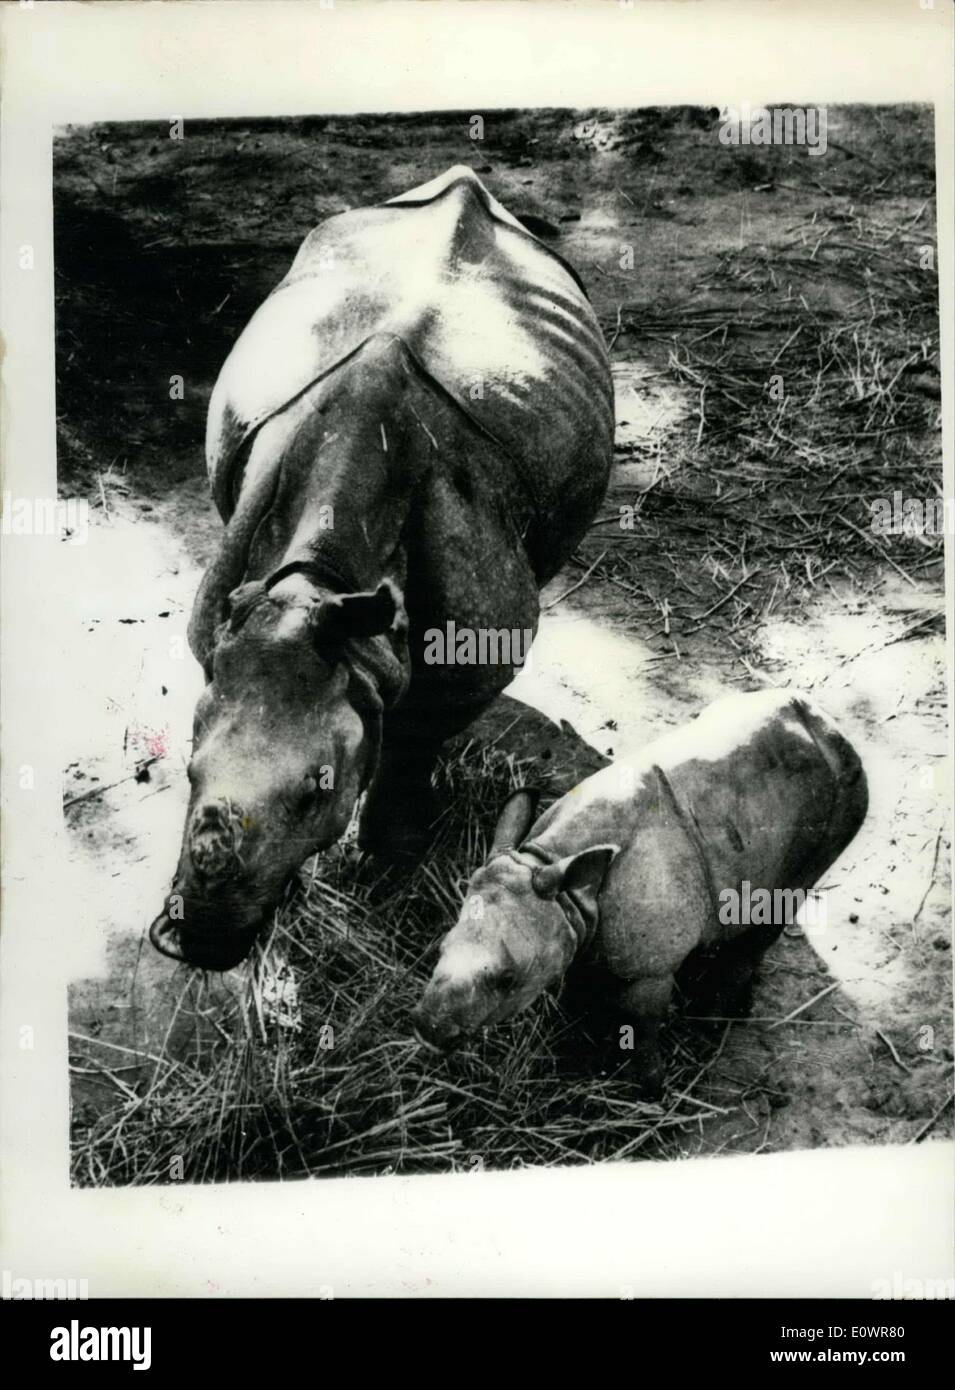 Nov. 22, 1963 - Animal Gift By Indian Government To The United States Mother And Baby Rhinos: The female rhino and baby which are to be flown shortly from Calcutta to Washington to join Tarun the Indian rhino in the National Zoological park there. The baby was born in Gauhati Zoo in Assam, after its mother had been captured in the Kaziranga game sanctuary. They are a gift from the Indian Government to the United States. Stock Photo